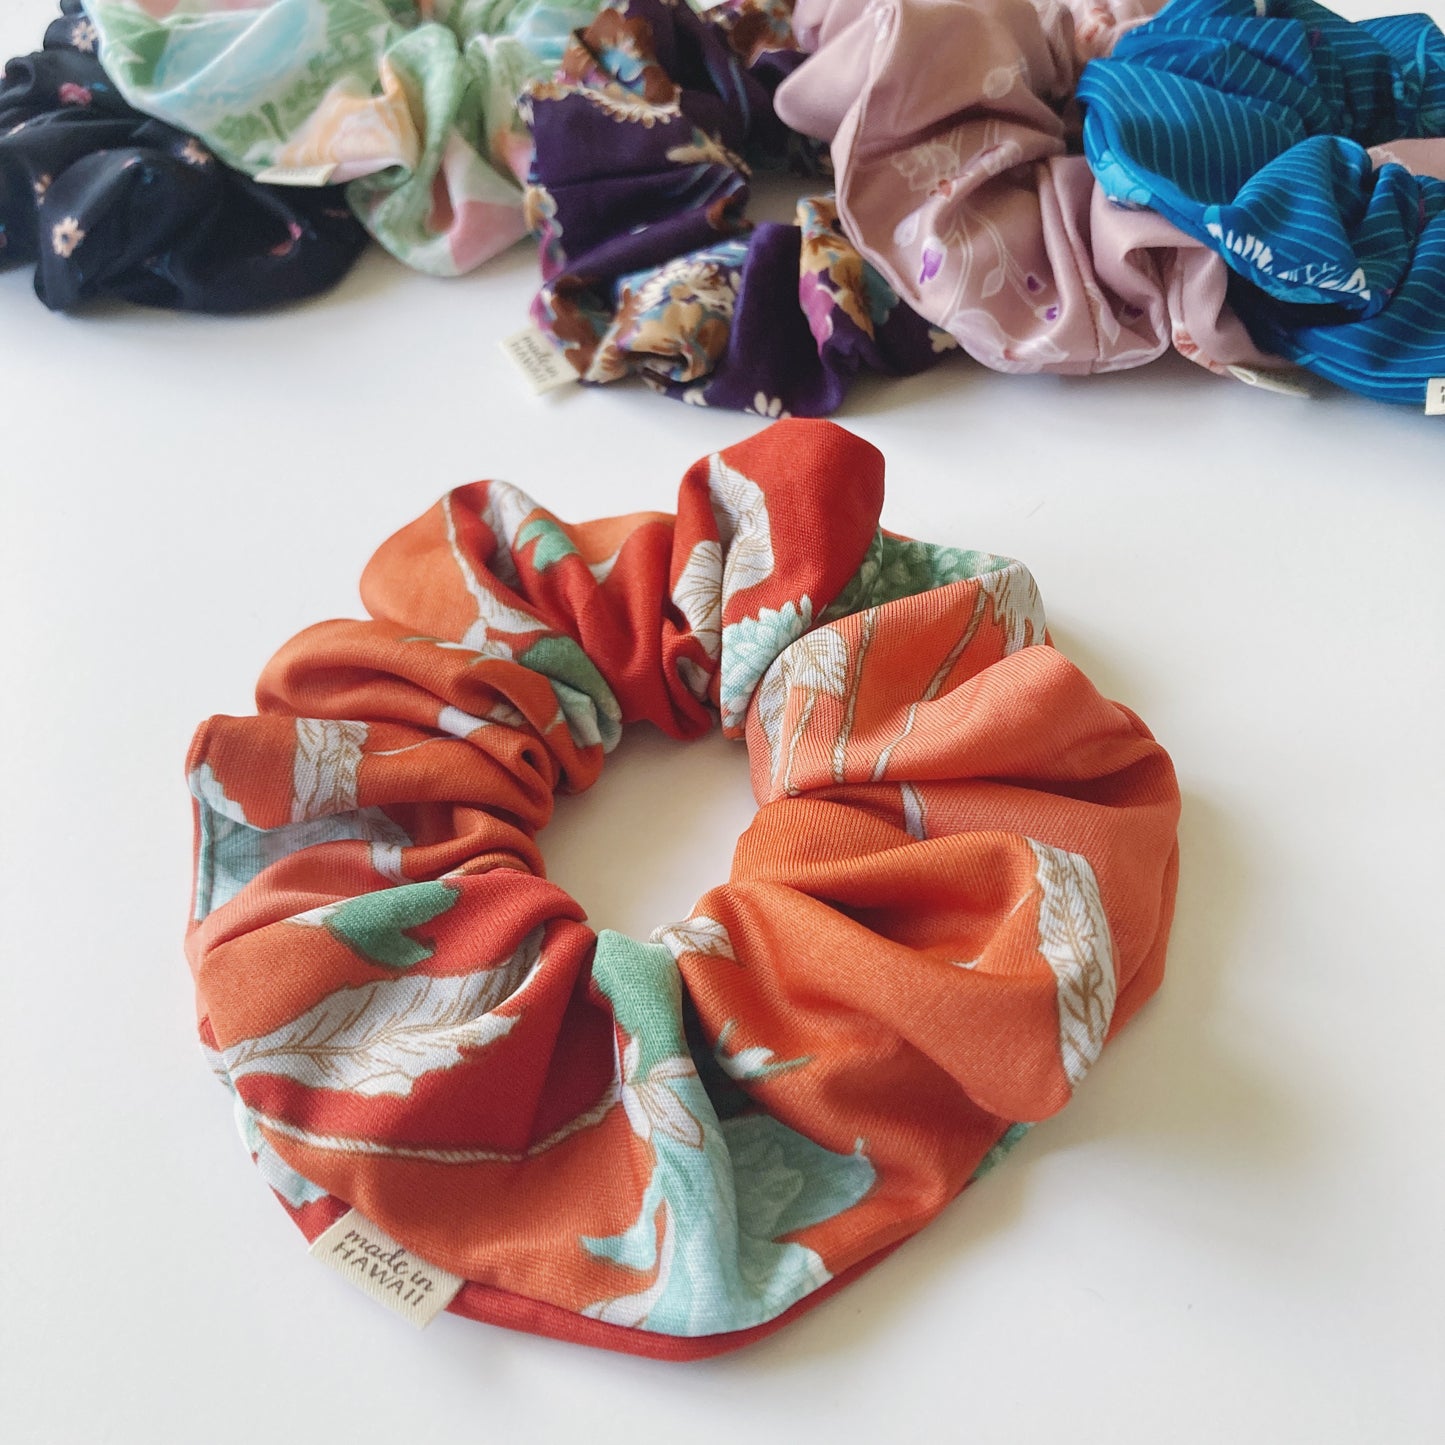 Hana Hou // SCRUNCHIE 003 // Made in Hawaii with upcycled textiles